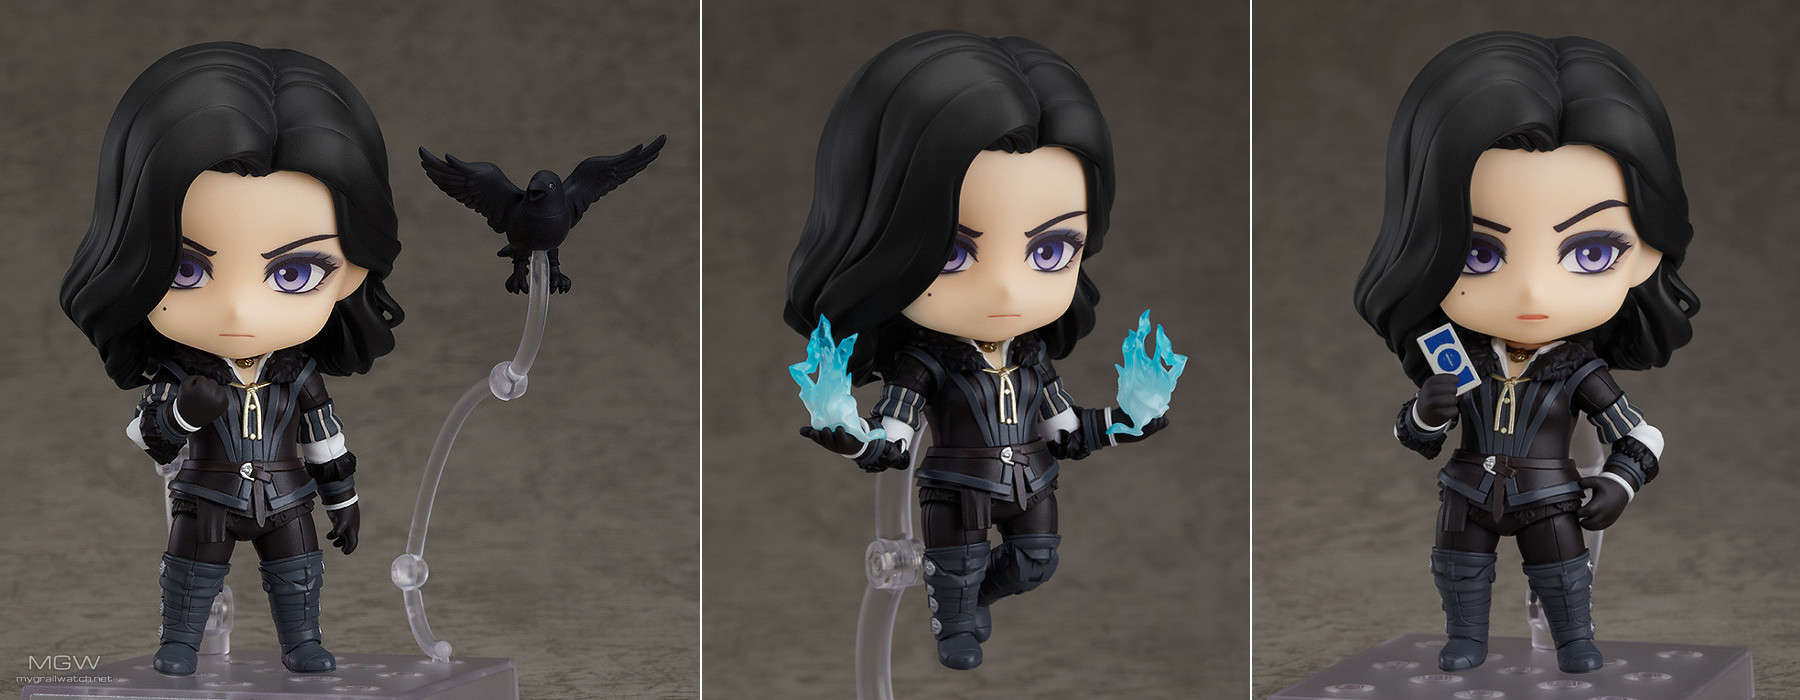 The Witcher 3 Nendoroid Yennefer by Good Smile Company